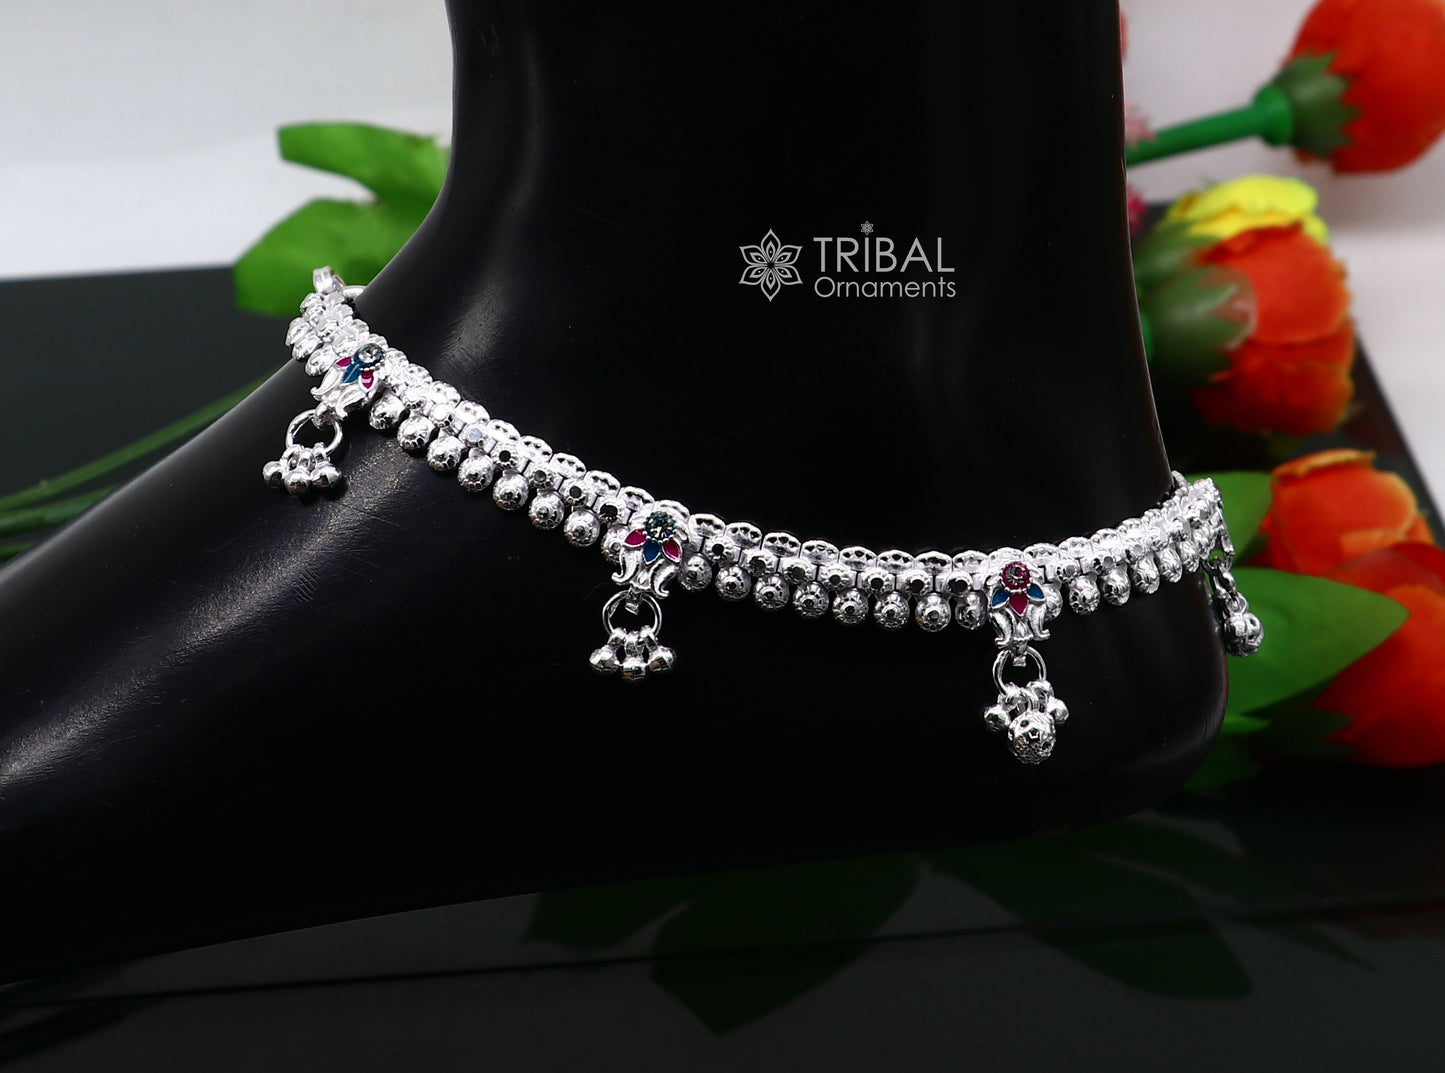 10" Gorgeous flexible anklet real 925 sterling silver handmade vintage design ankle bracelet excellent tribal  ethnic brides jewelry ank542 - TRIBAL ORNAMENTS